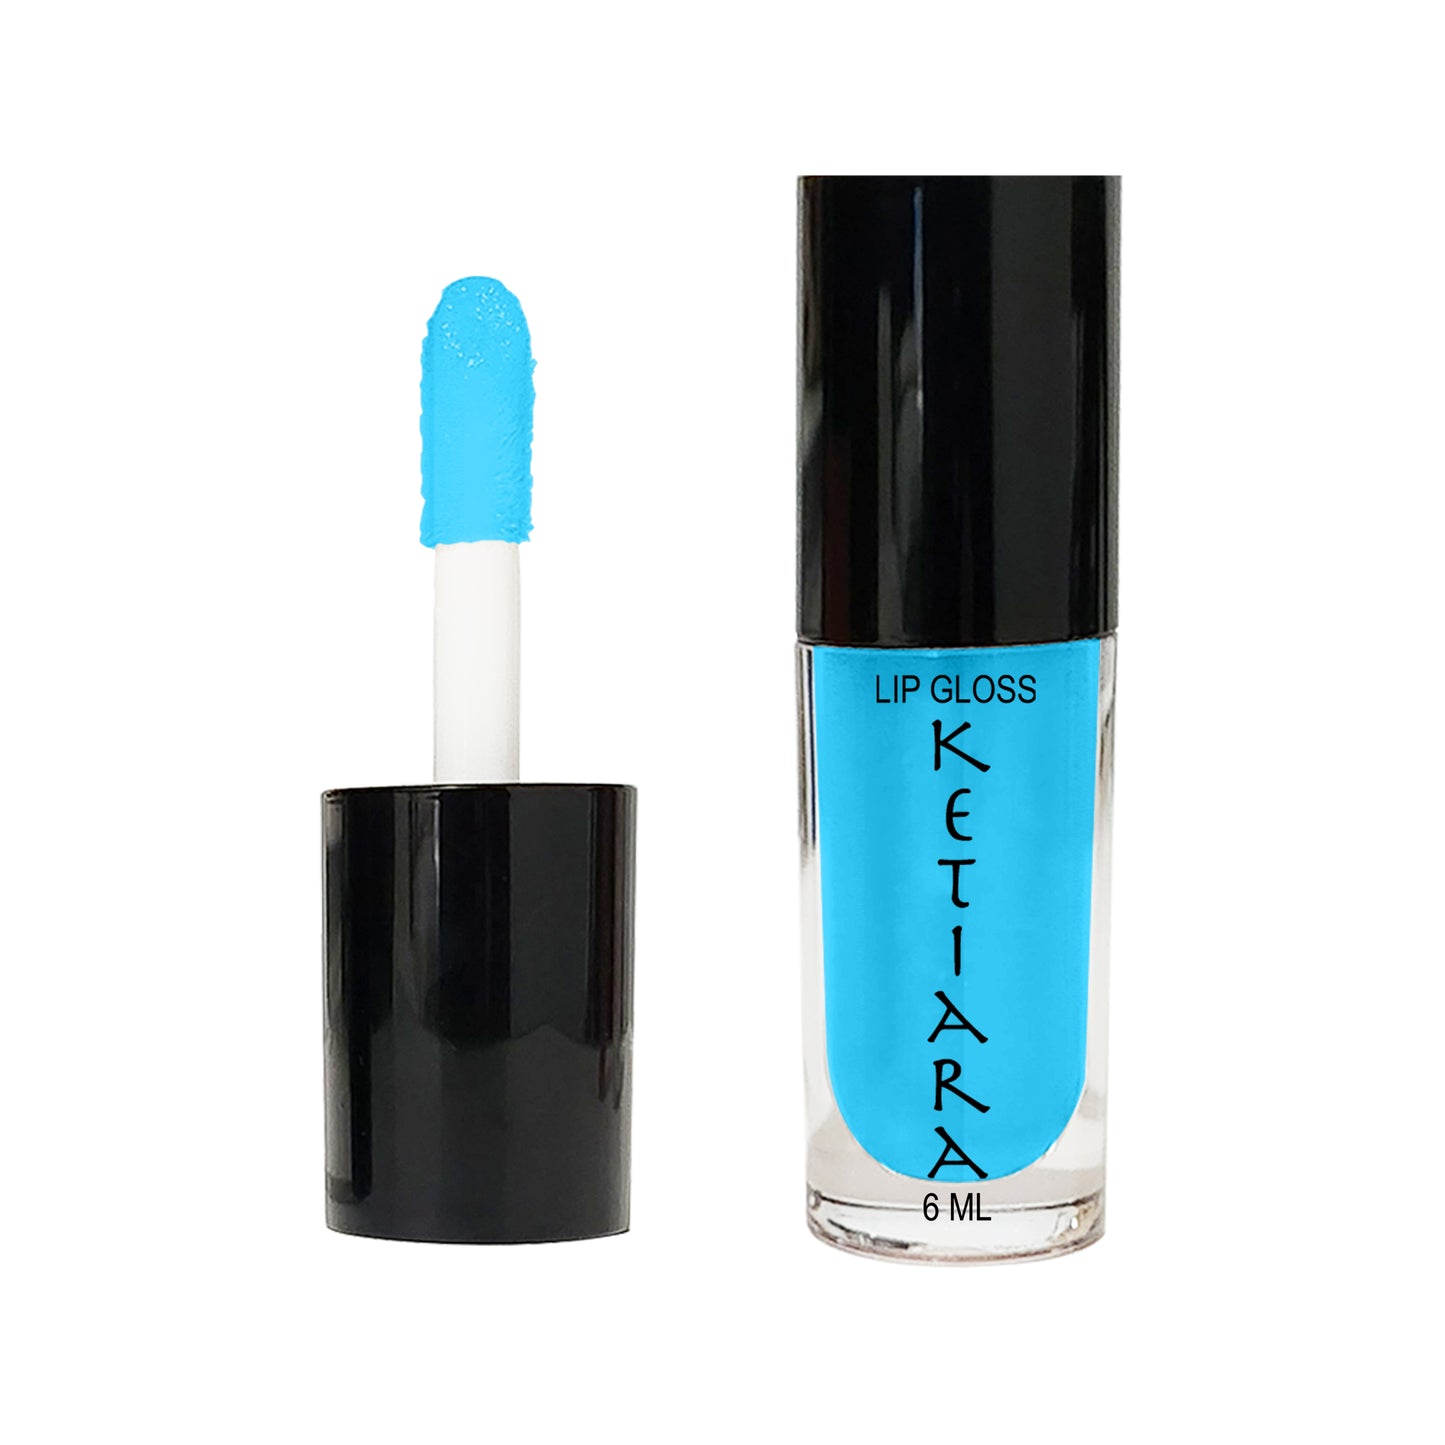 Mermaid Big Brush Wand Hydrating Non-sticky Premium Sheer Lip Gloss Infused With Hyaluronic Acid